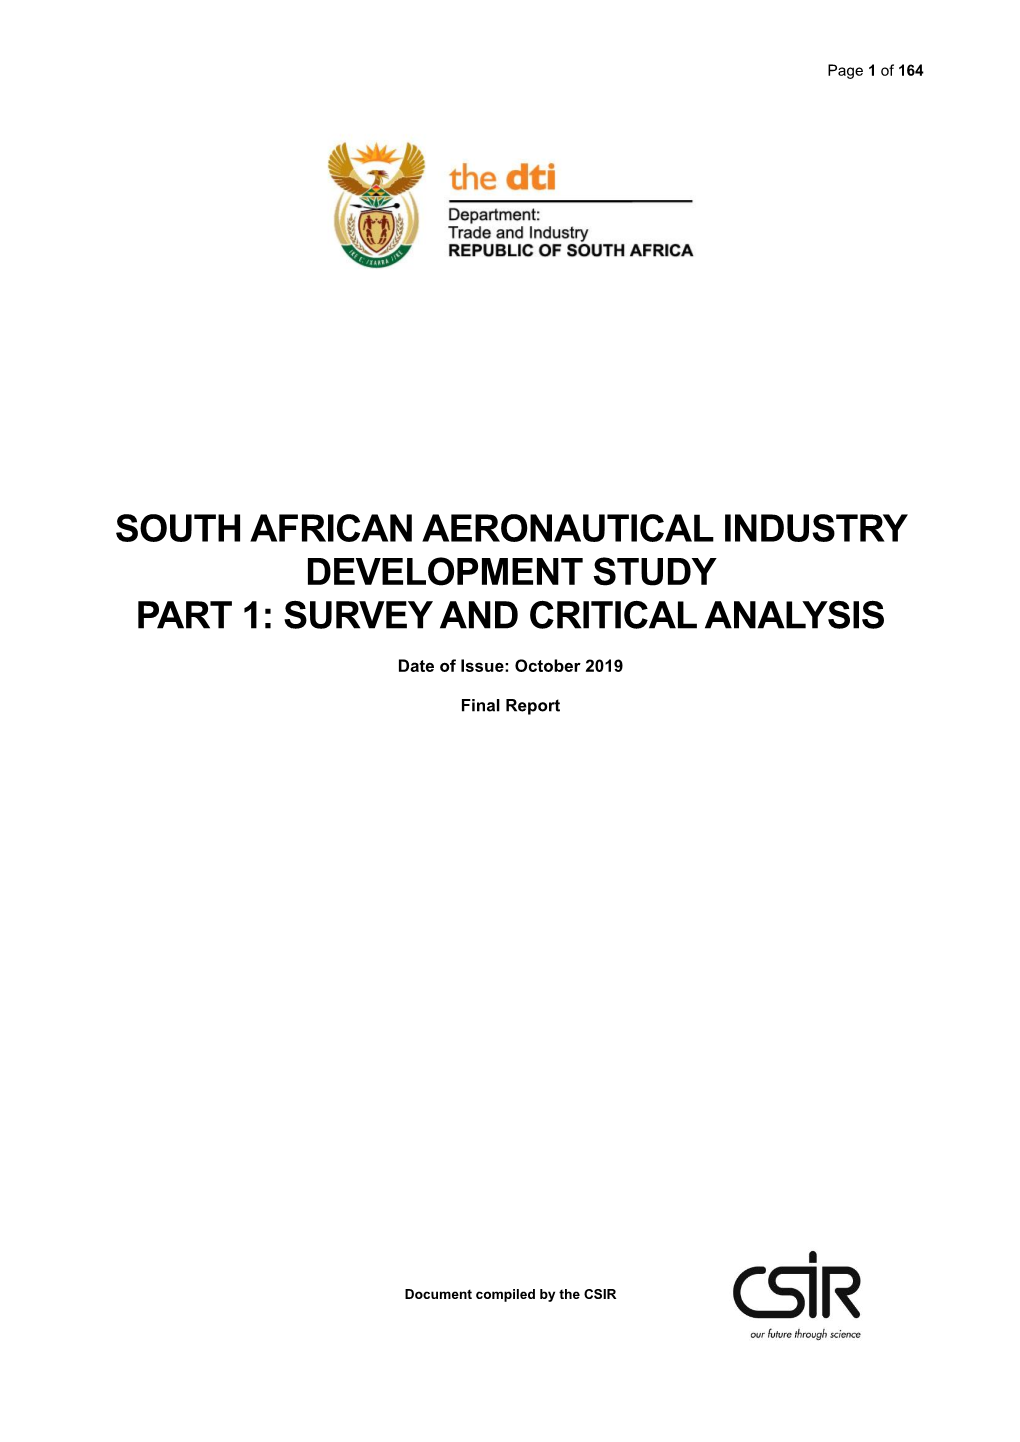 South African Aeronautical Industry Development Study Part 1: Survey and Critical Analysis